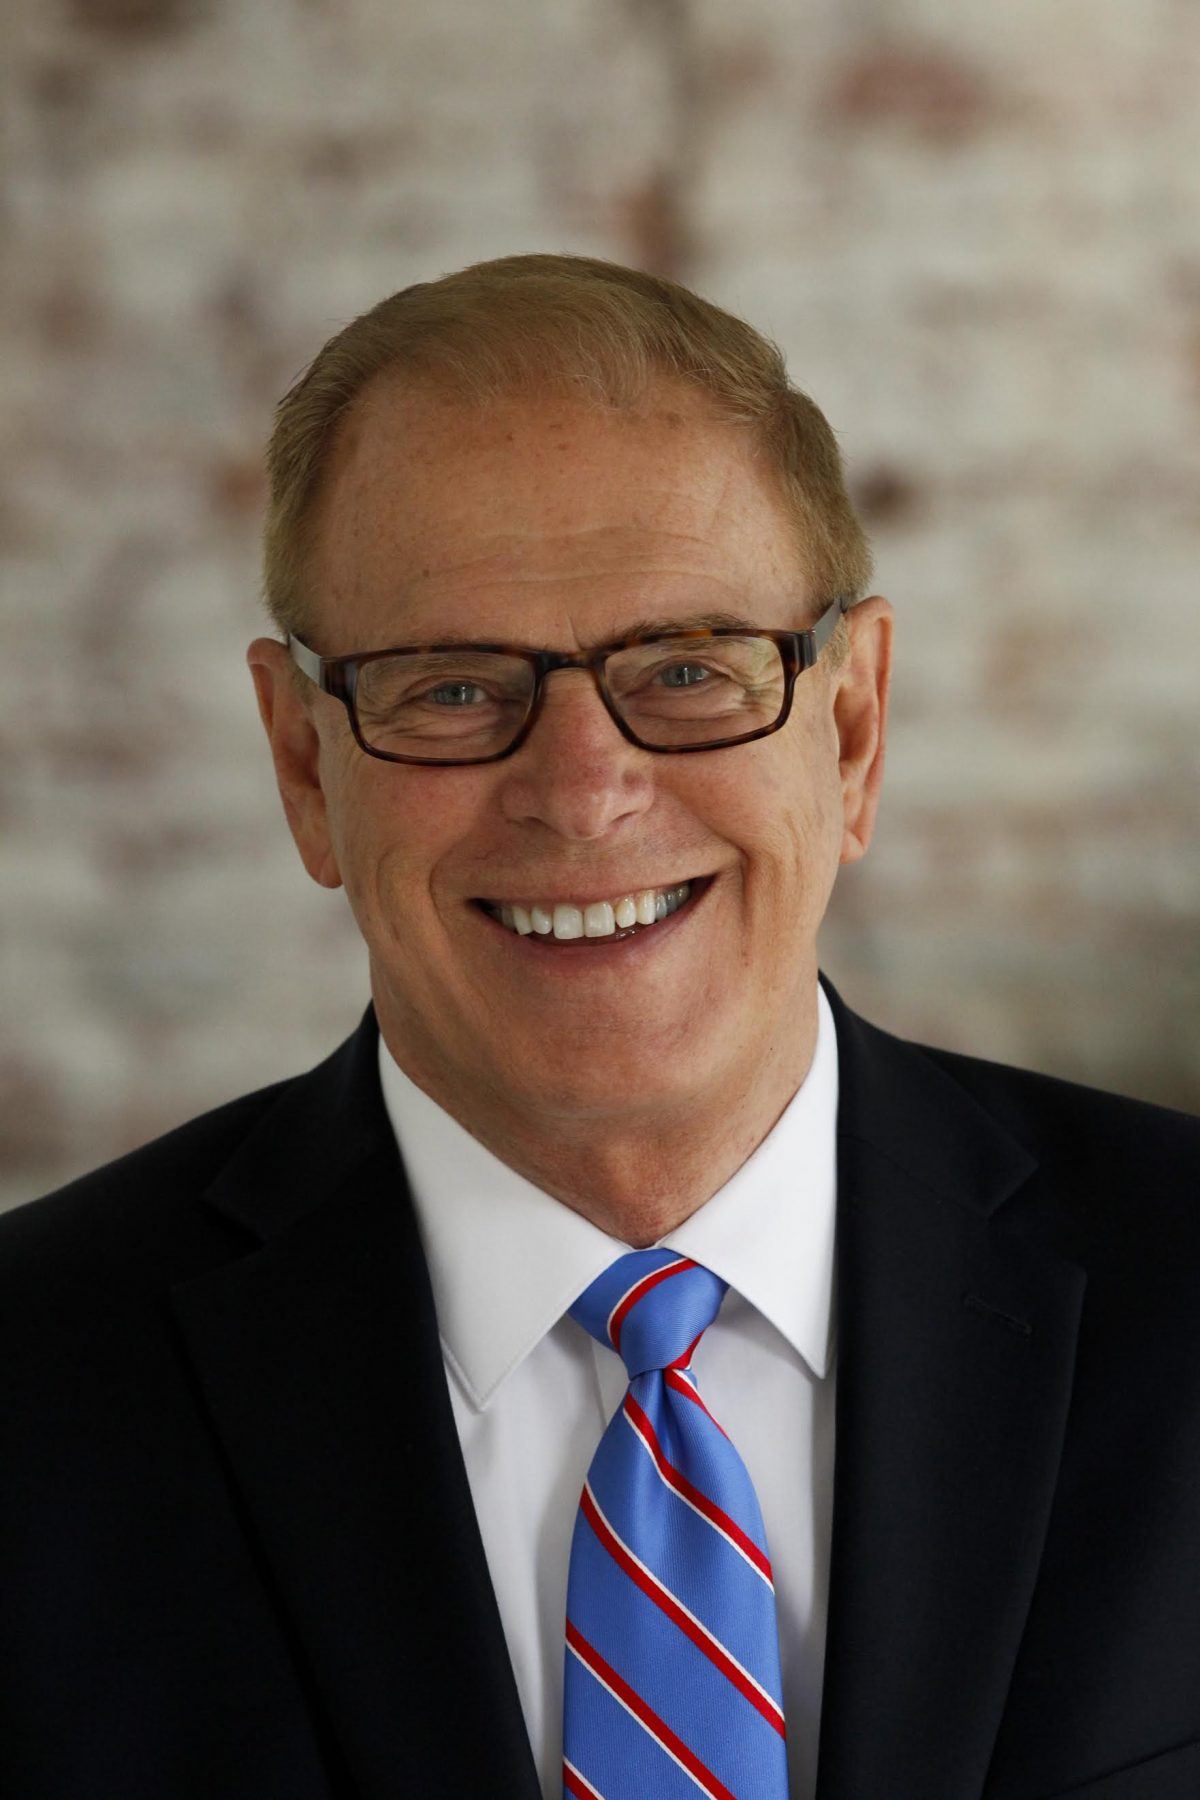 Ted Strickland, former Governor of Ohio